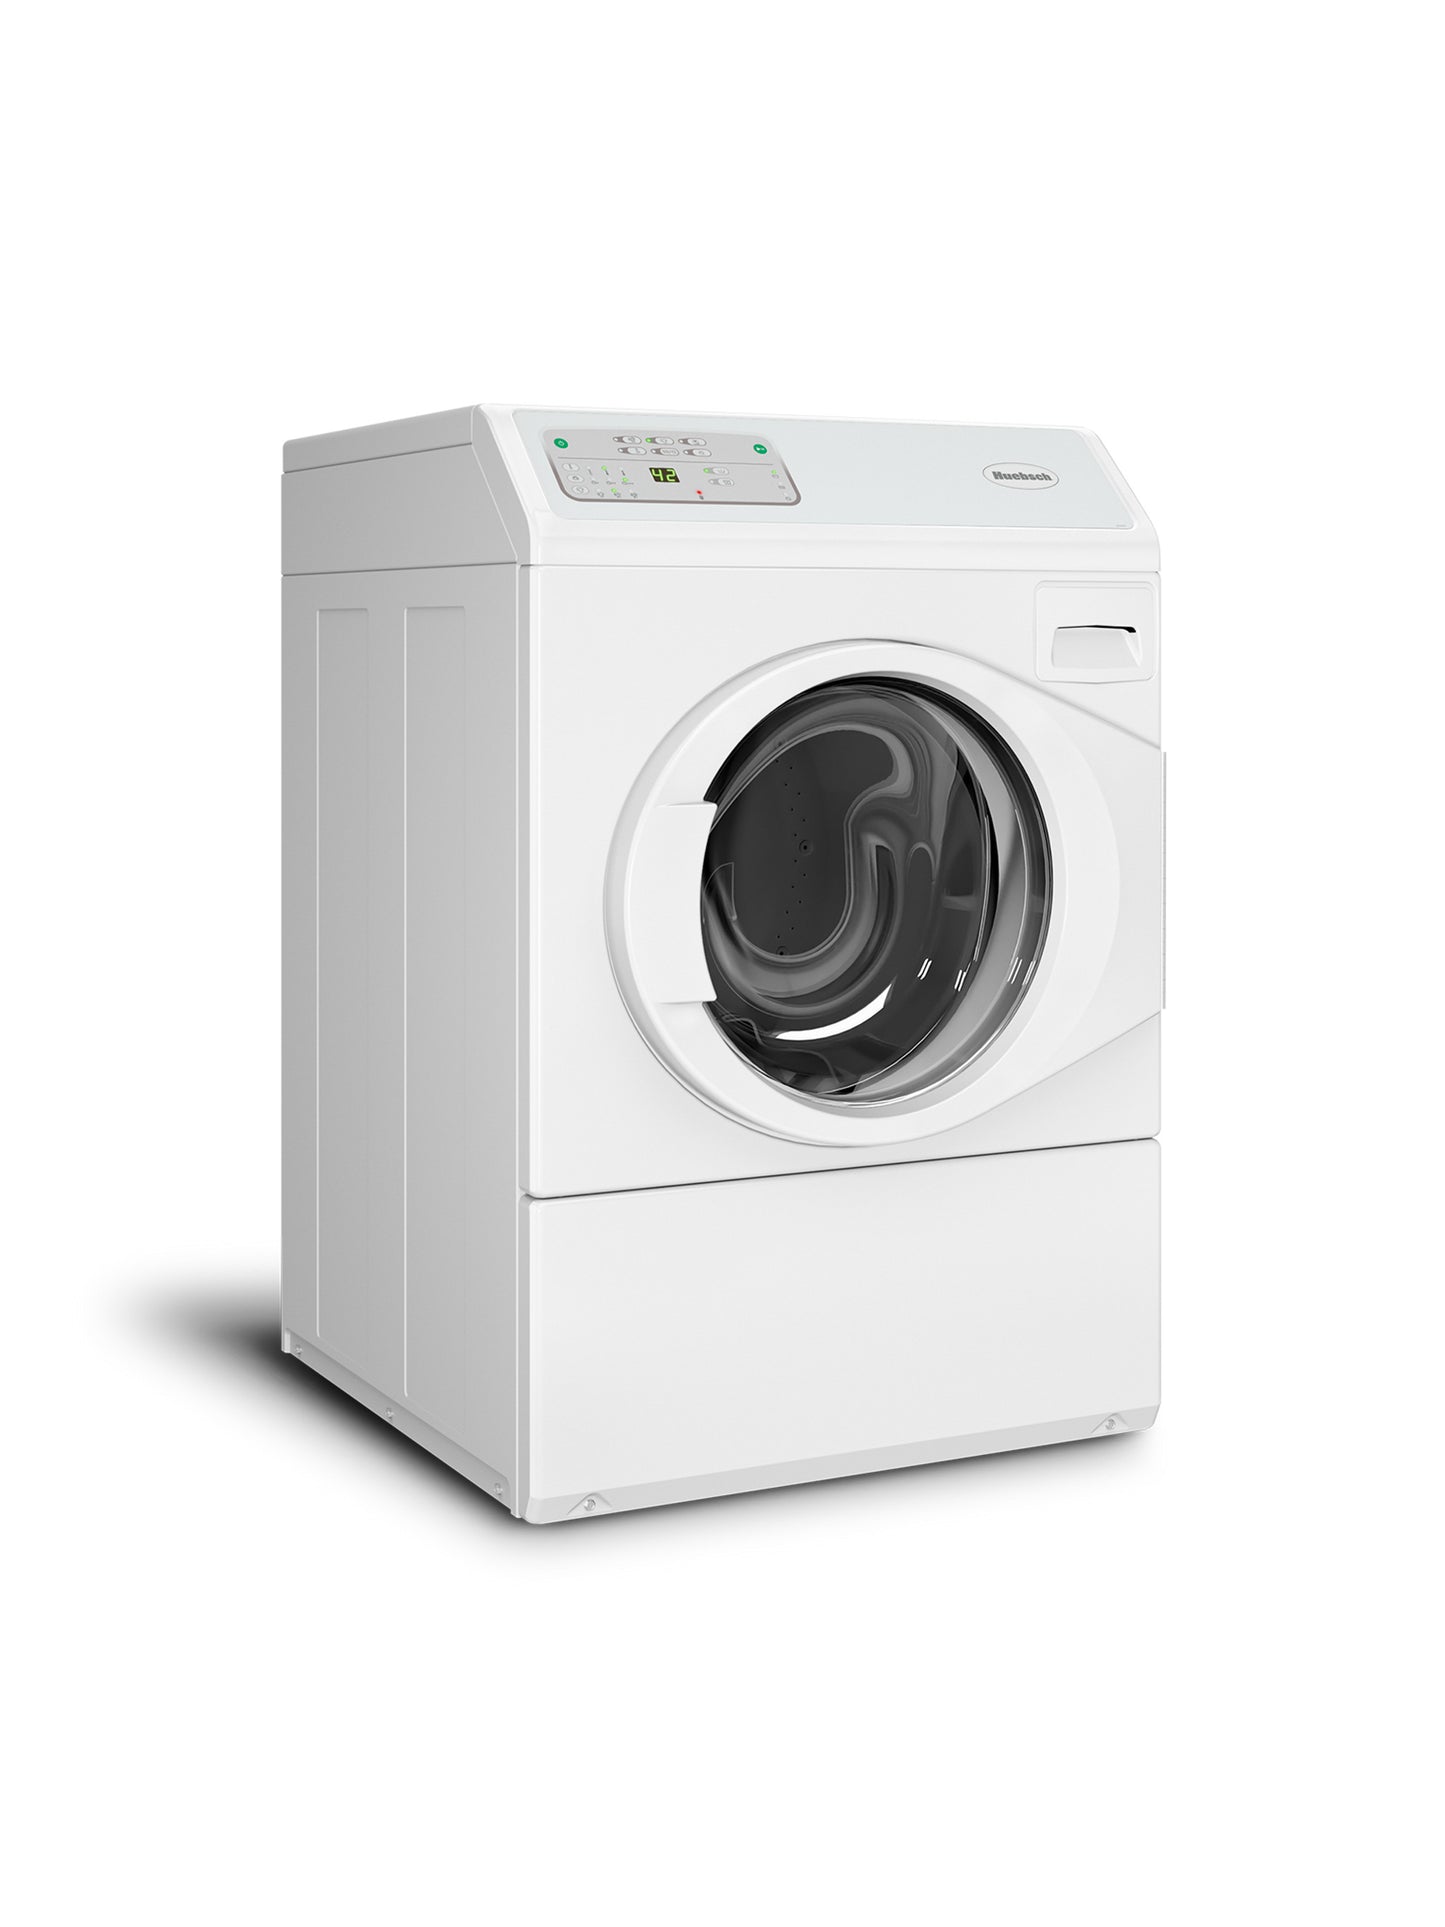 ON-PREMISE FRONT LOAD WASHER - ELECTRONIC